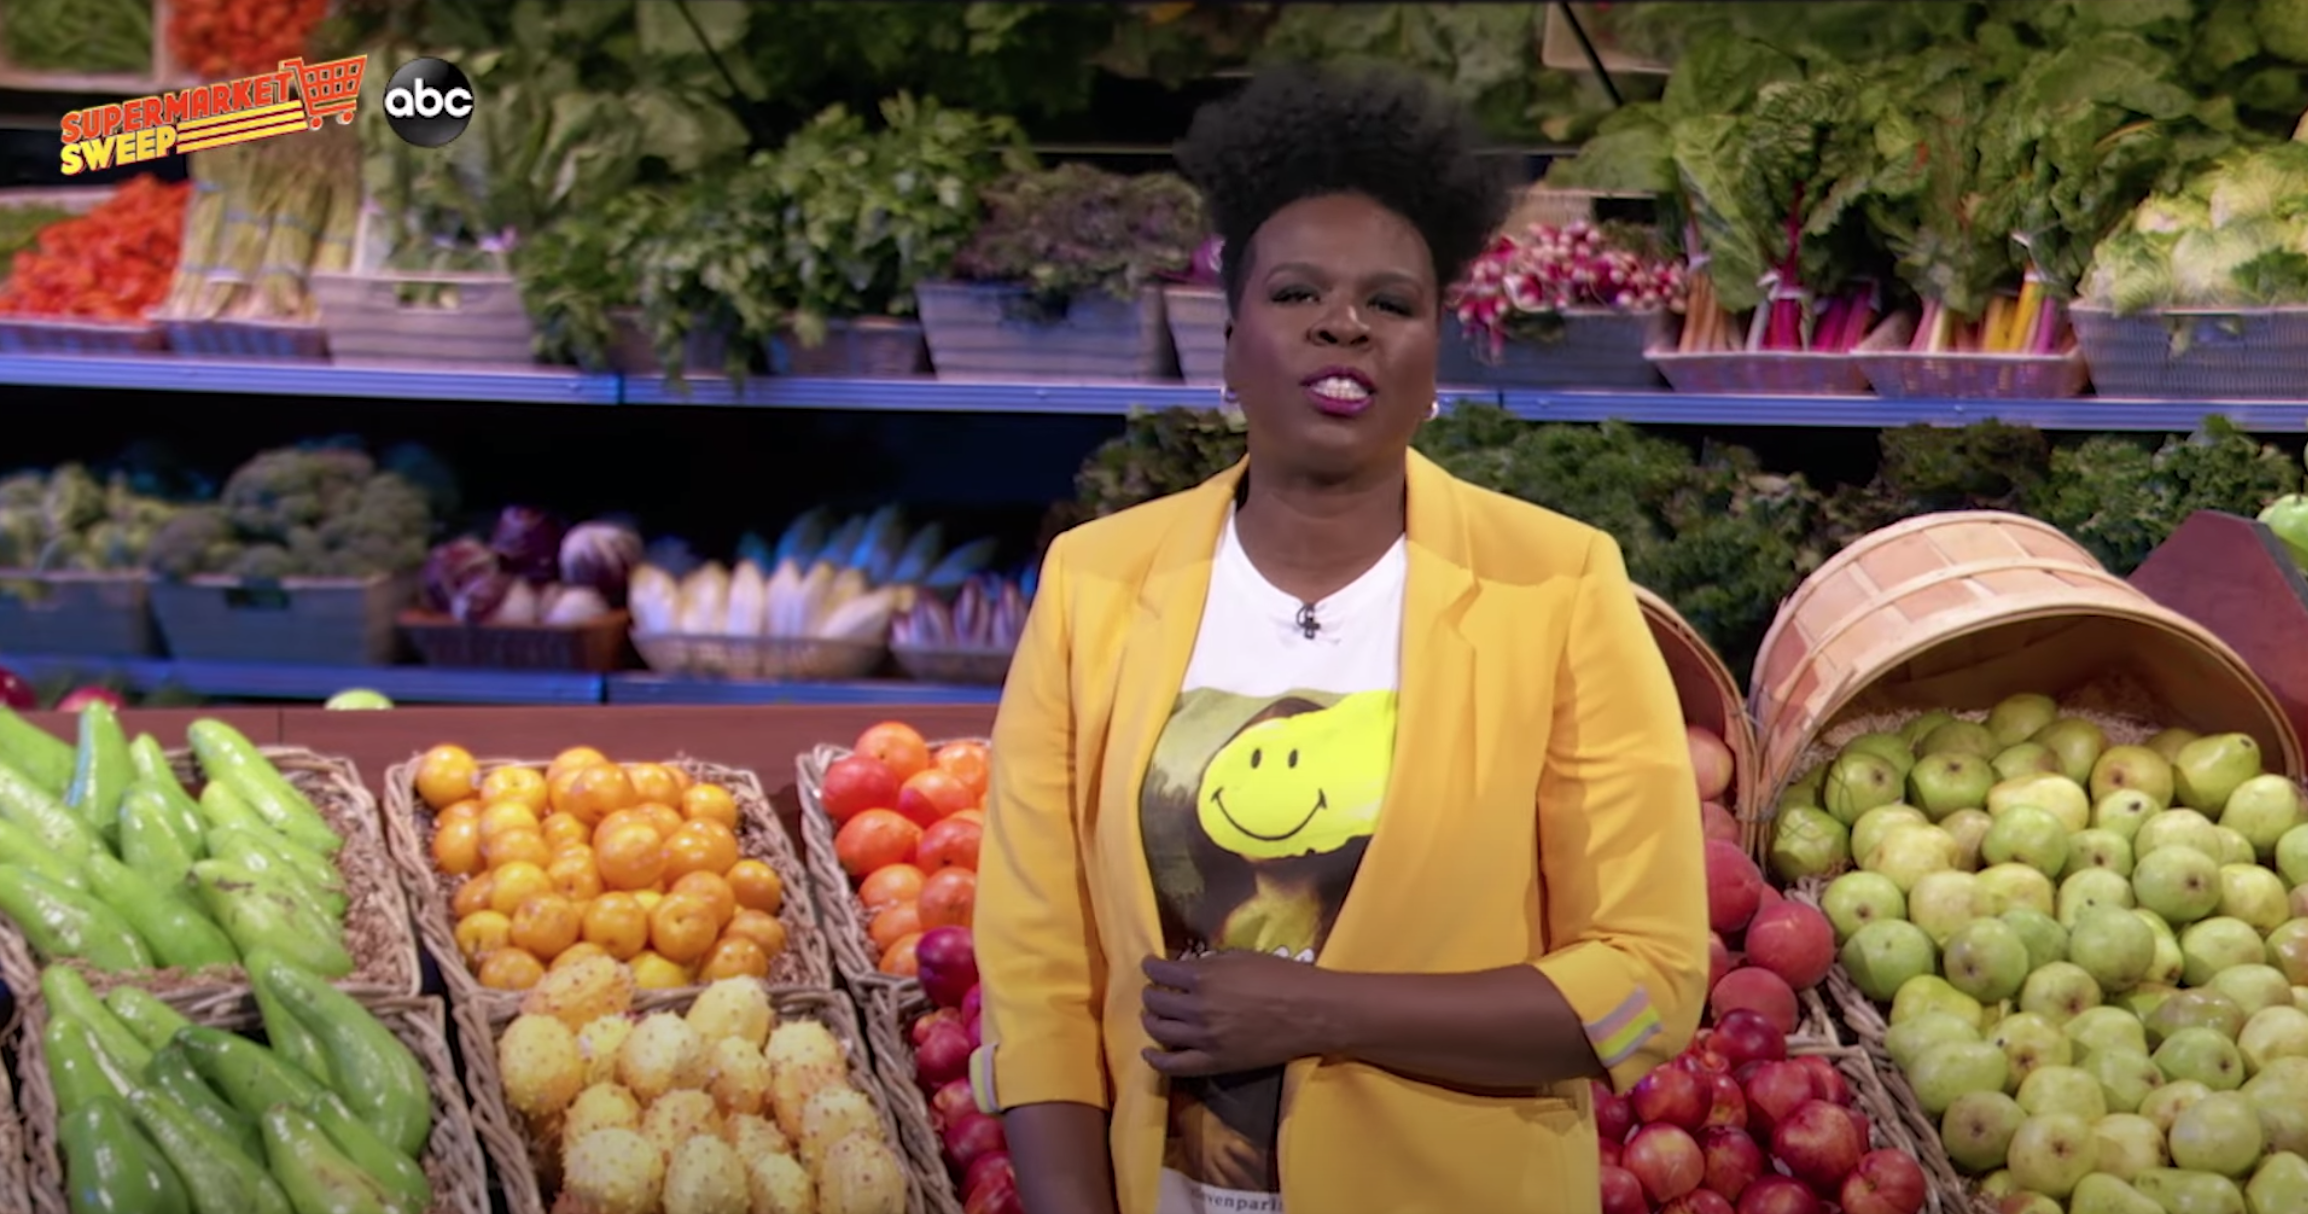 Leslie hosts the show while standing in front of fresh produce featured in the show&#x27;s grocery store set